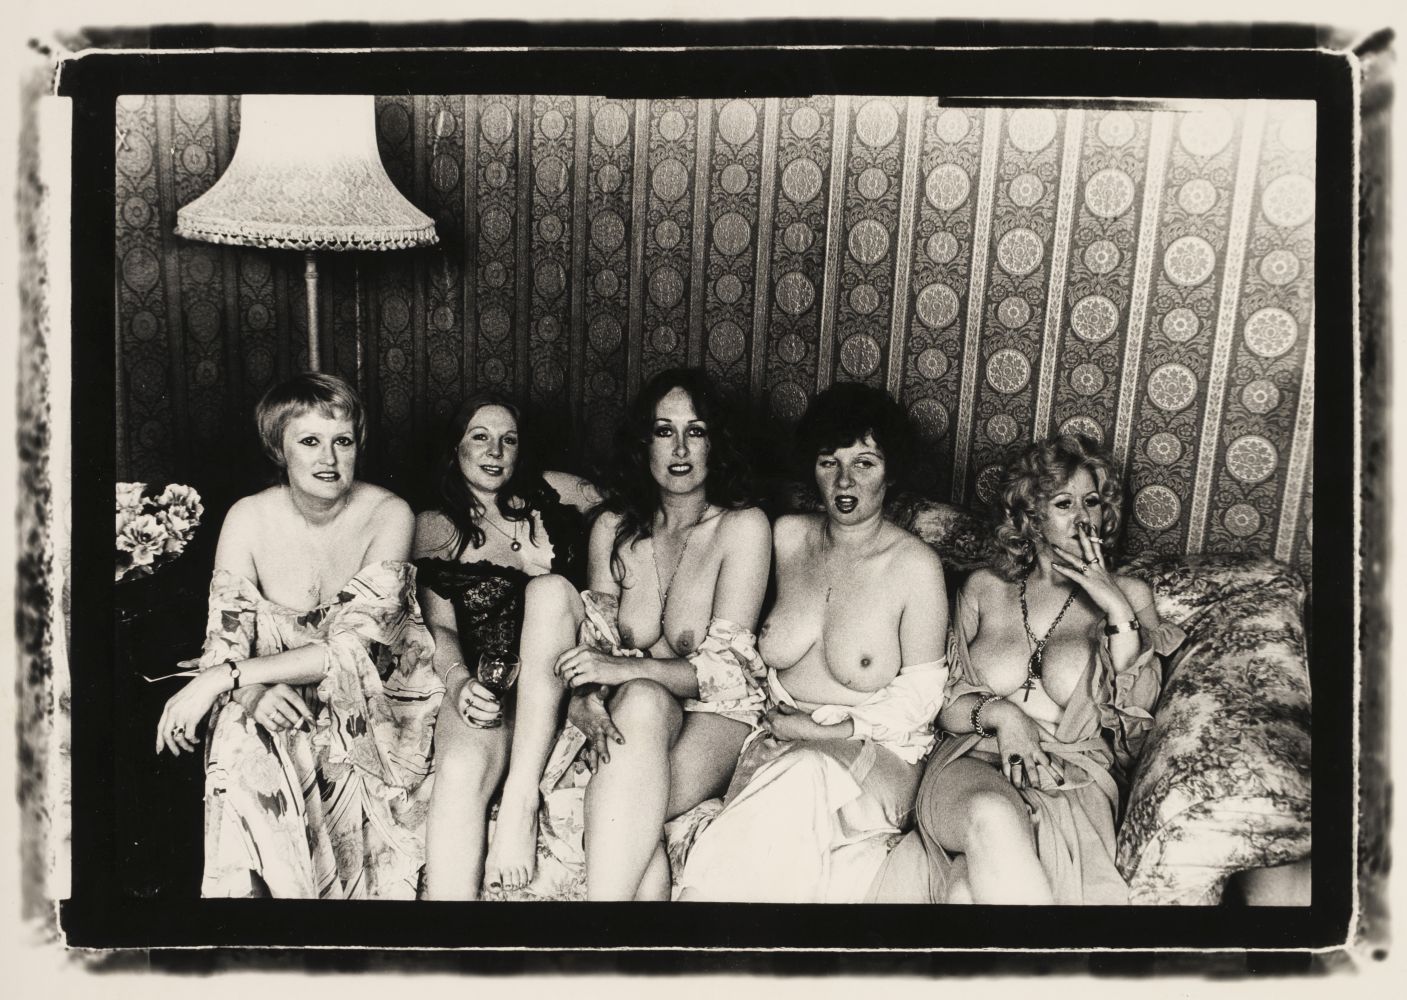 Clark (Nobby, active 1968-present). A group of 9 candid photographs of semi-dressed women